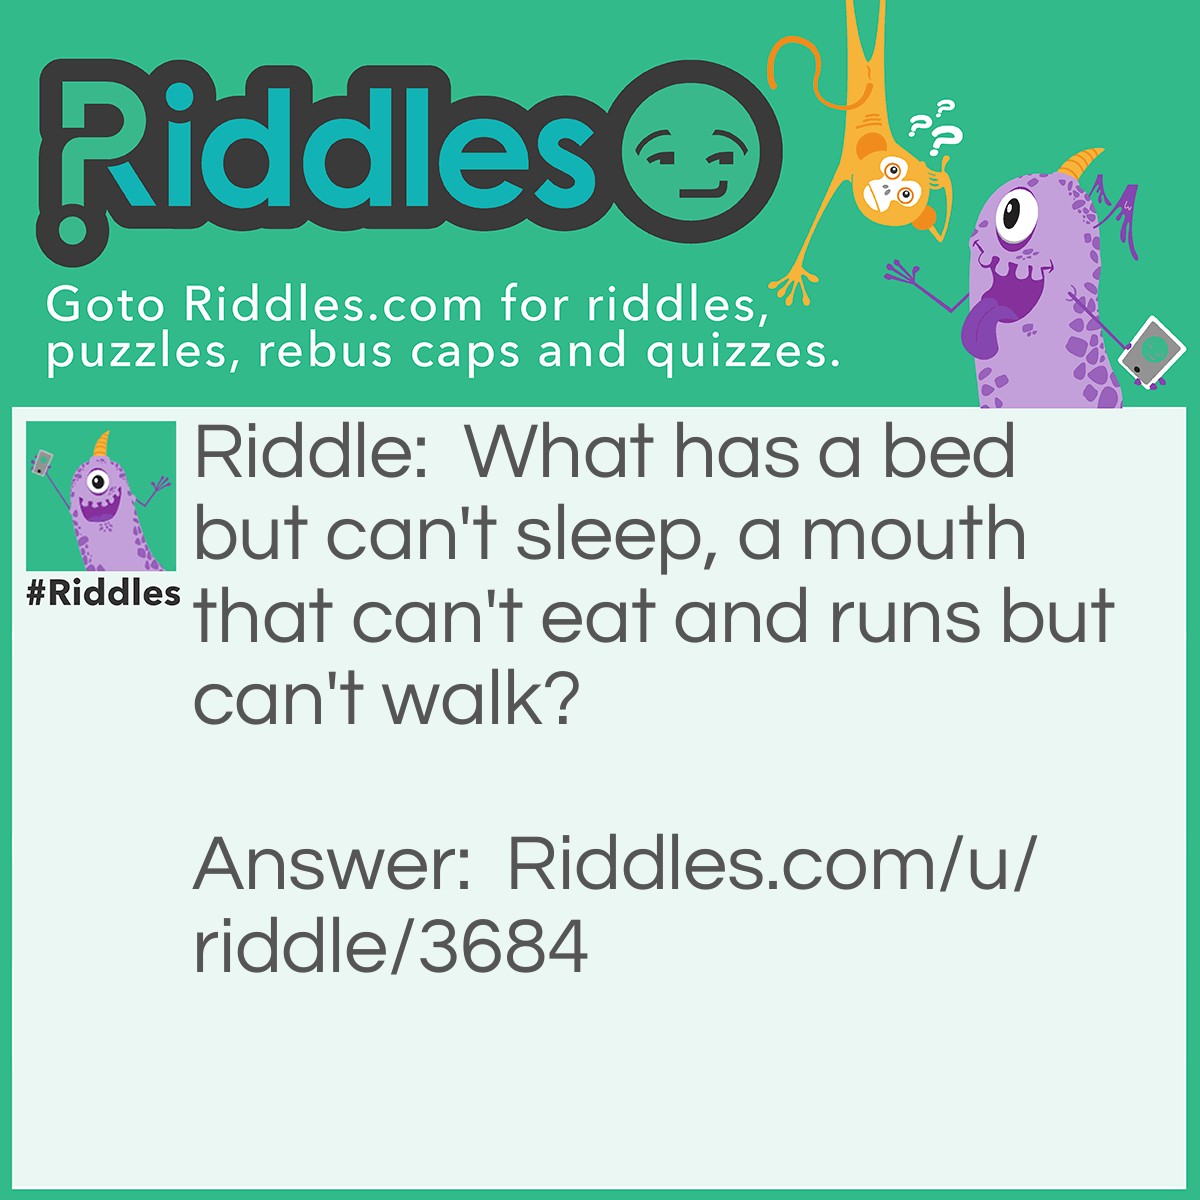 Riddle: What has a bed but can't sleep, a mouth that can't eat and runs but can't walk? Answer: A river.